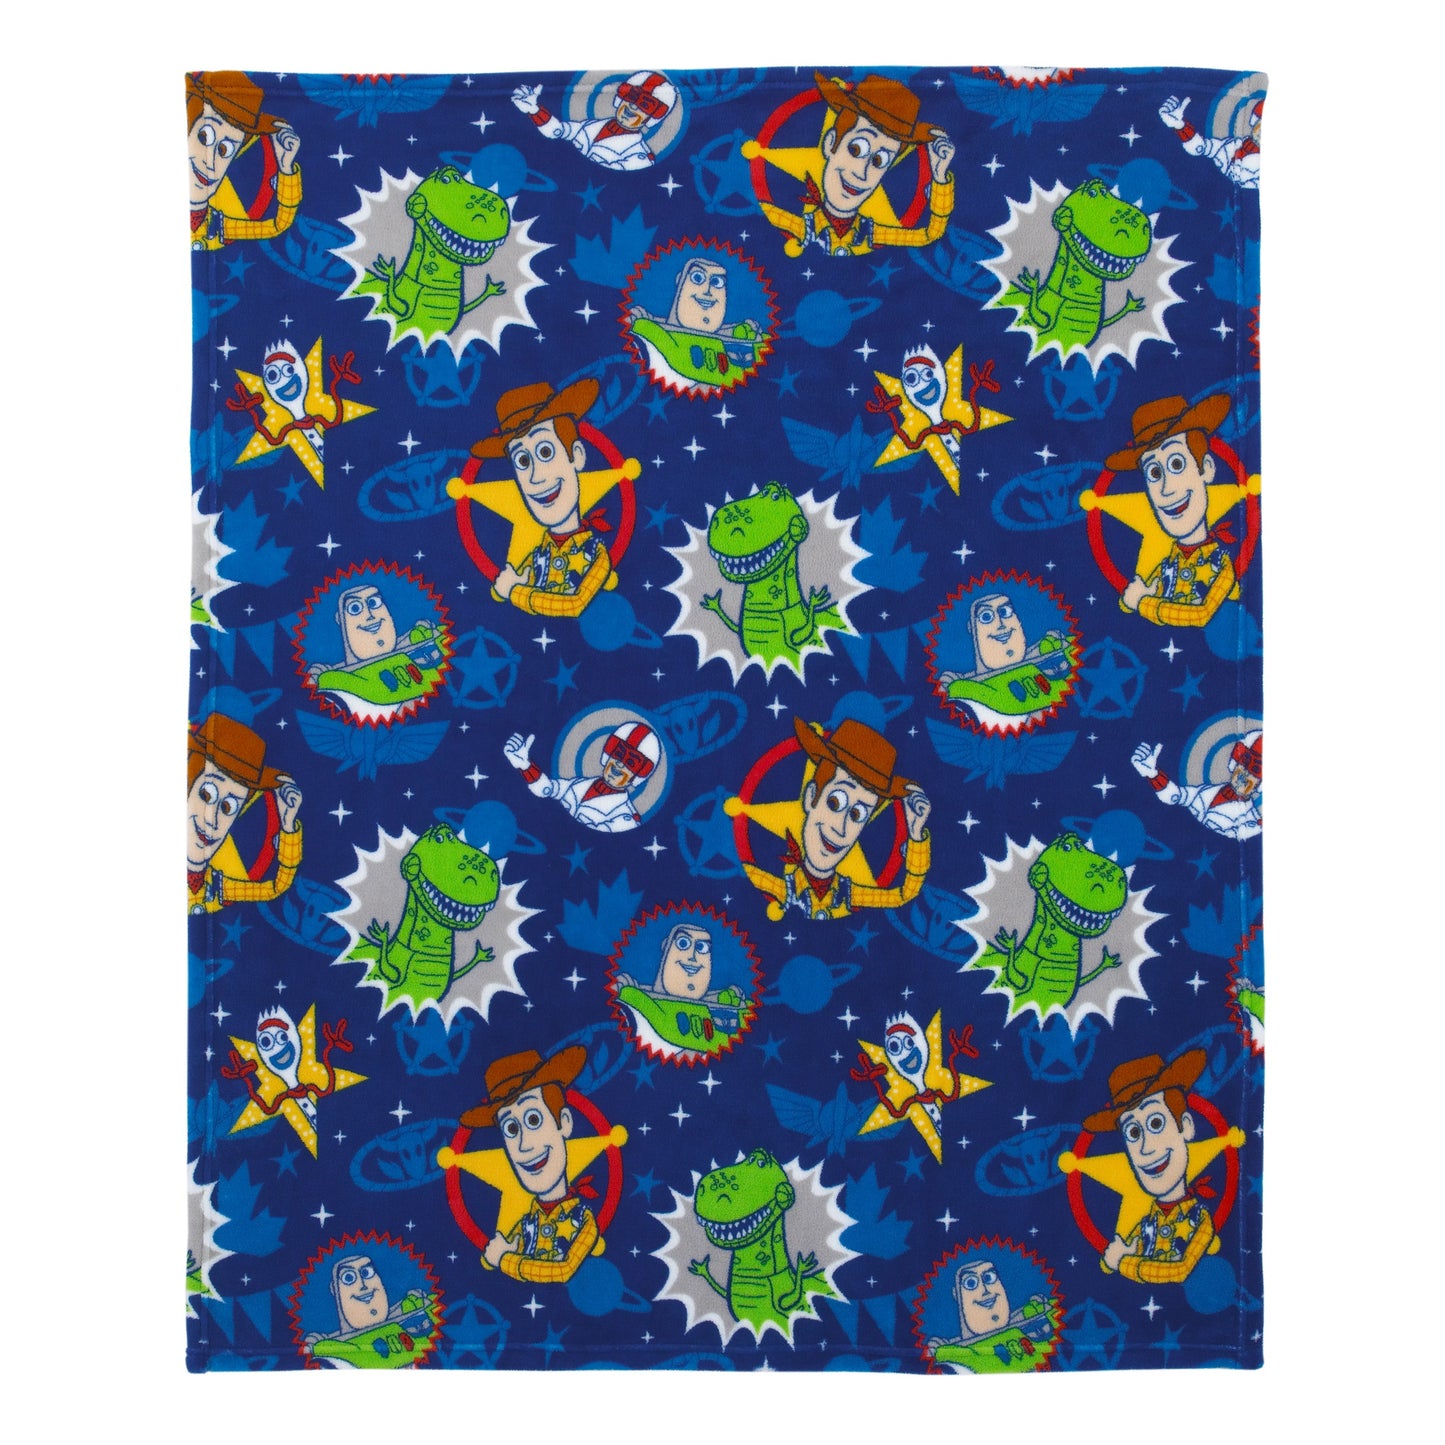 Disney Toy Story 4 - Blue, Green, Yellow and Red Super Soft Plush Toddler Blanket